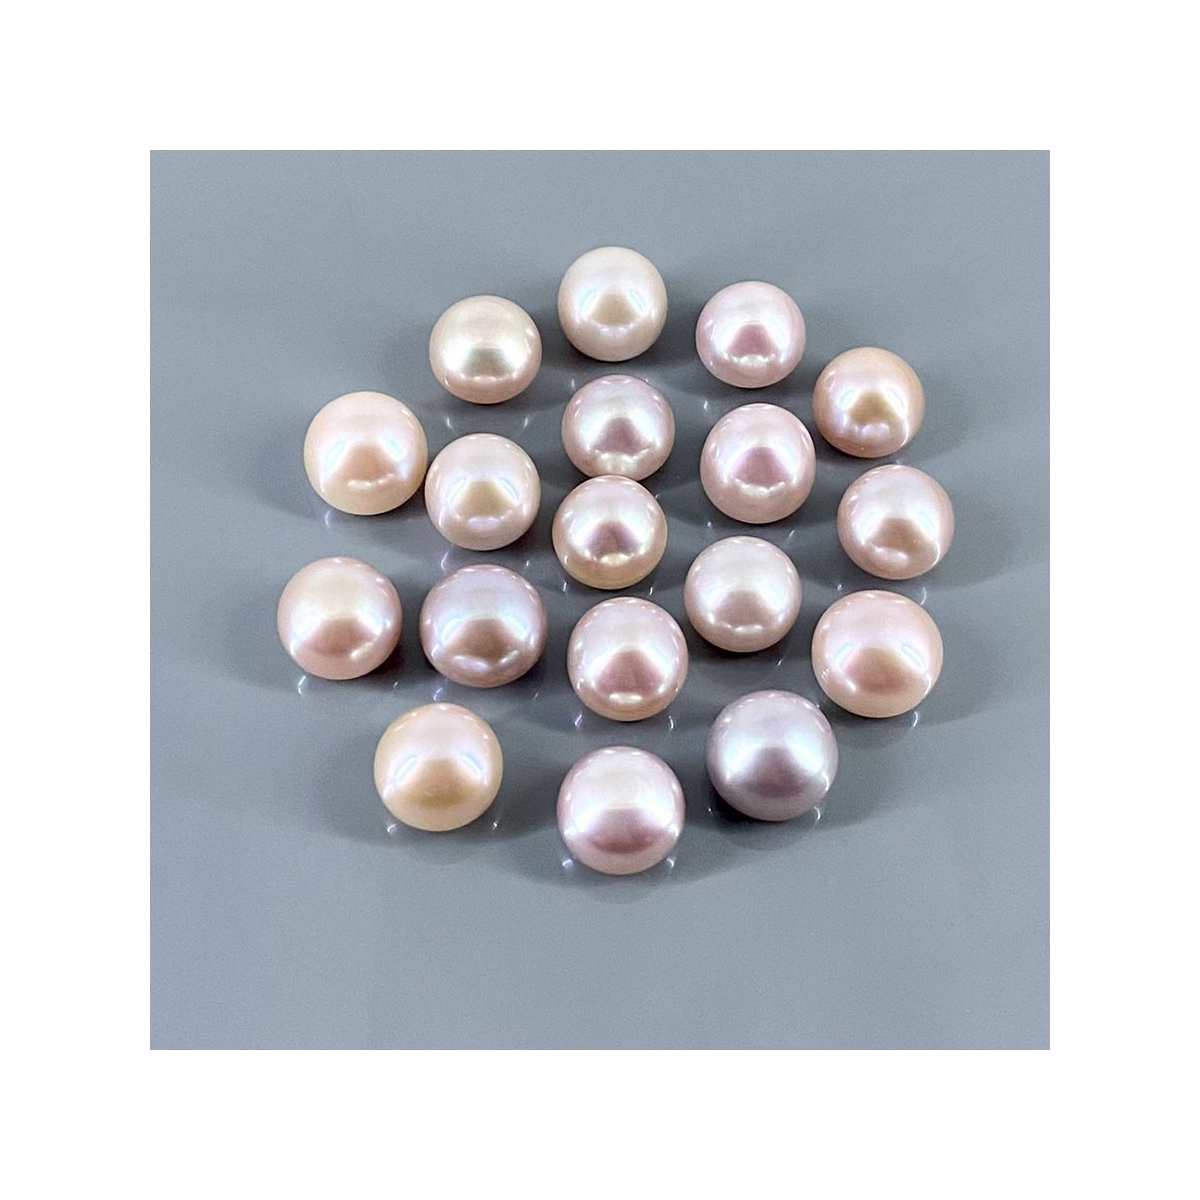 Peach Freshwater Pearl 10.5-11mm Smooth Round AAA Grade Pearl Beads Lot -  159546